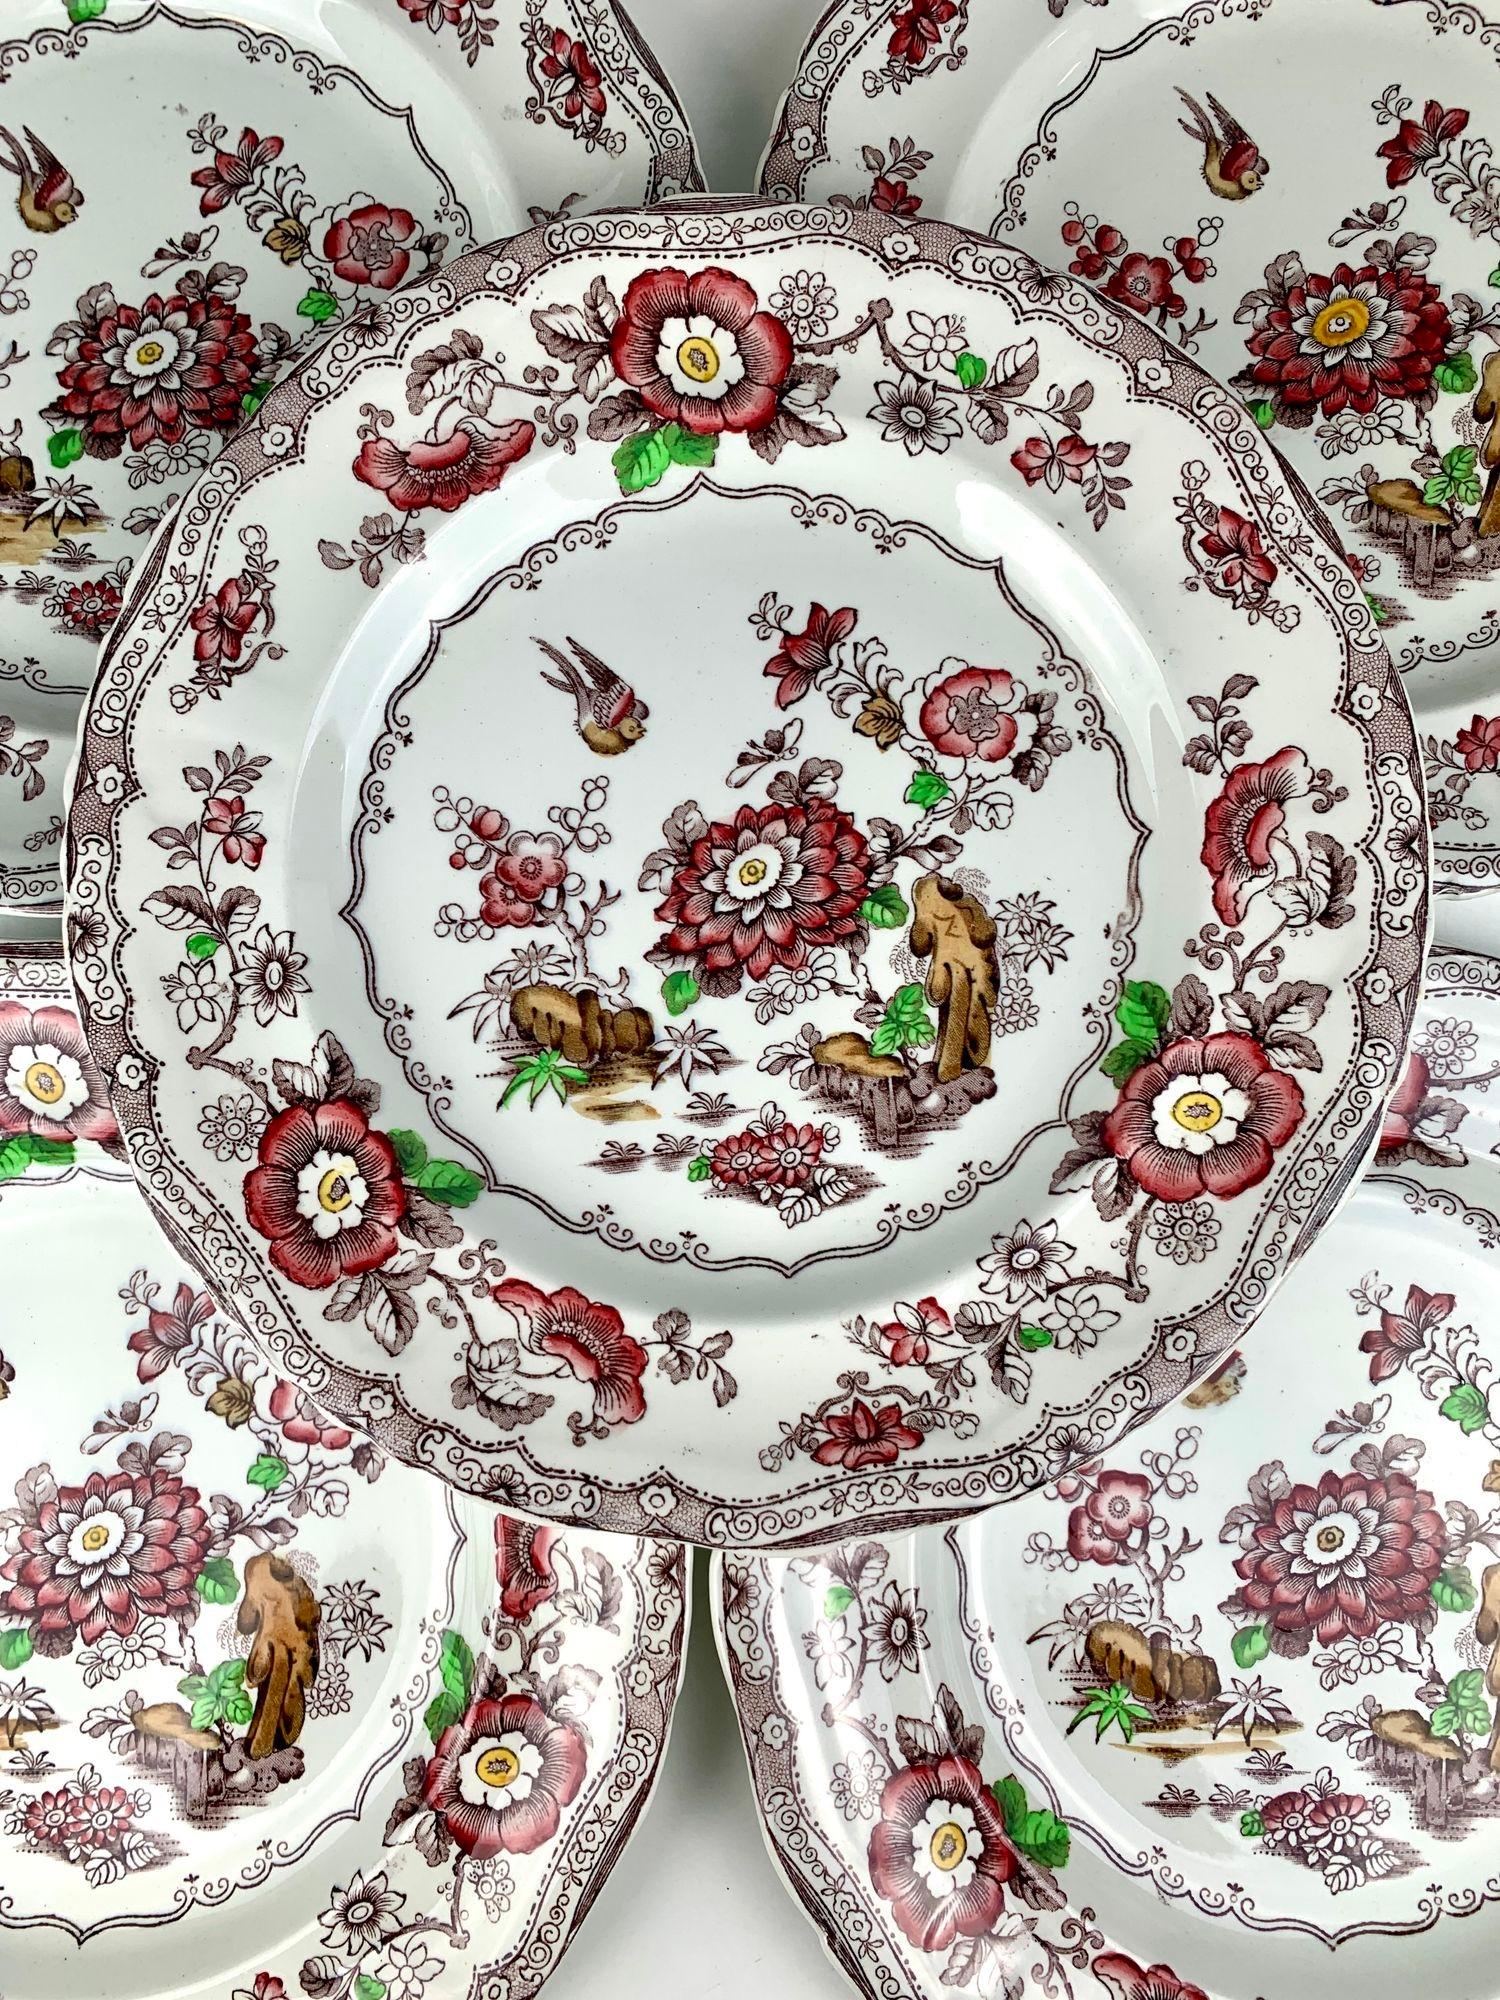 This set of a dozen Victorian dinner plates was crafted in Staffordshire, England, circa 1870.
The plates are beautiful and large, measuring 10